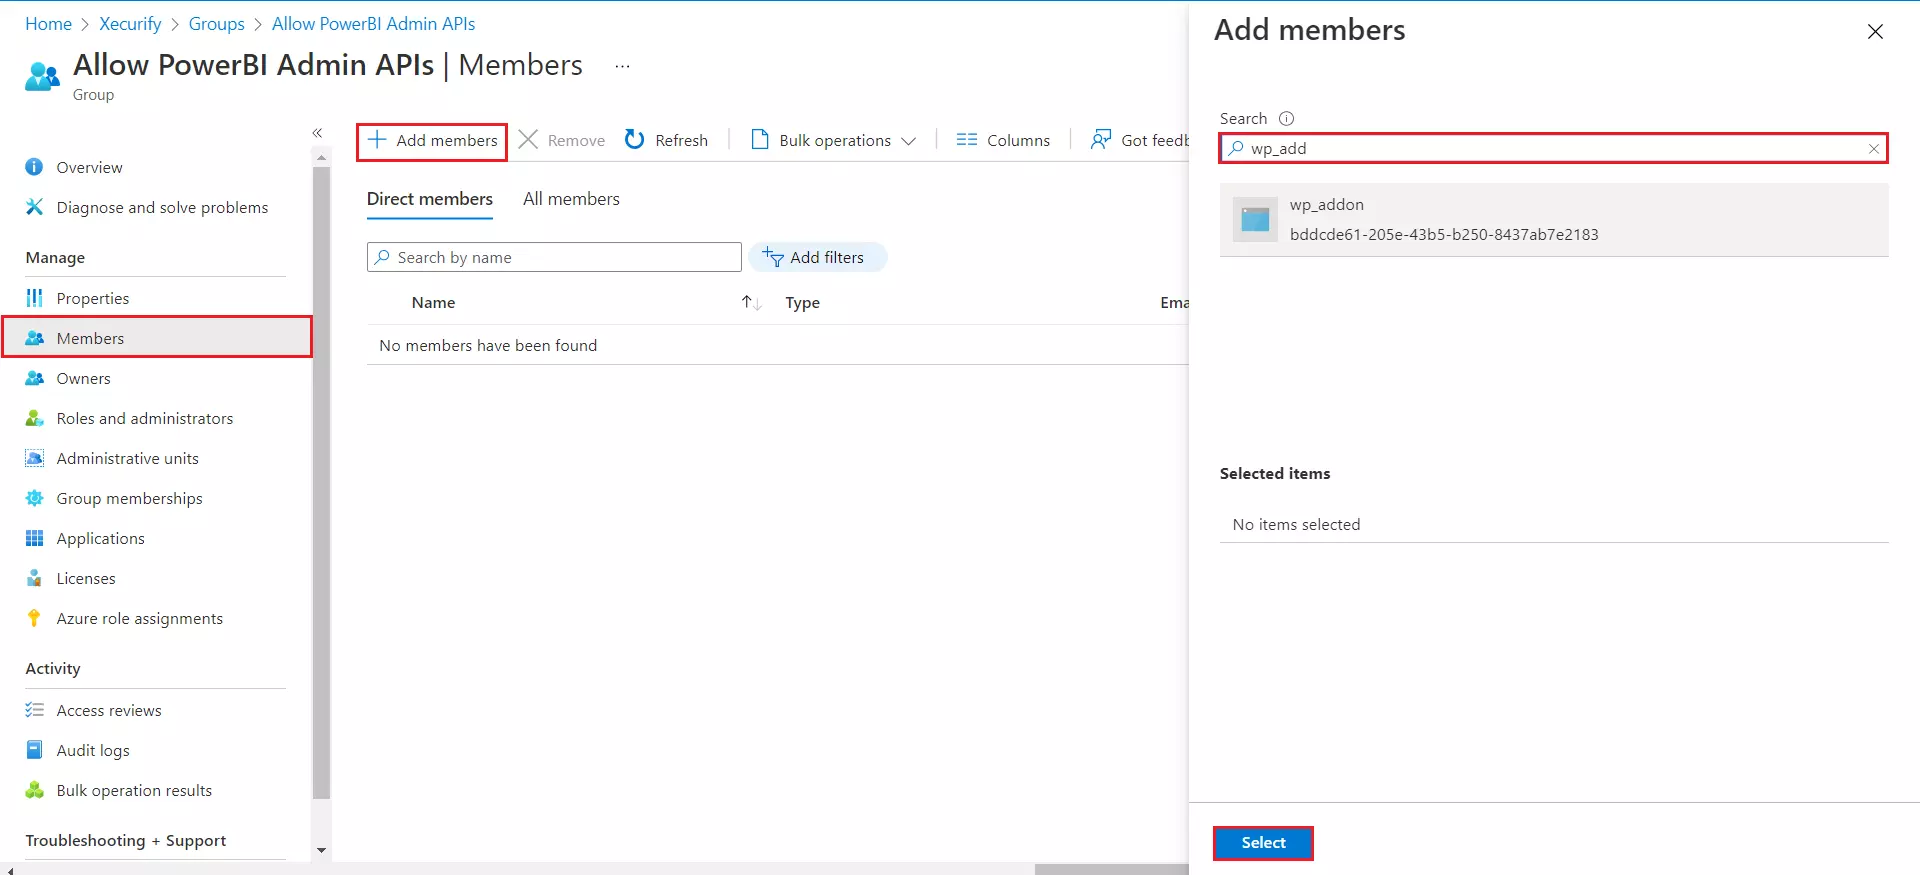 Azure AD user sync with WordPress - Admin consent